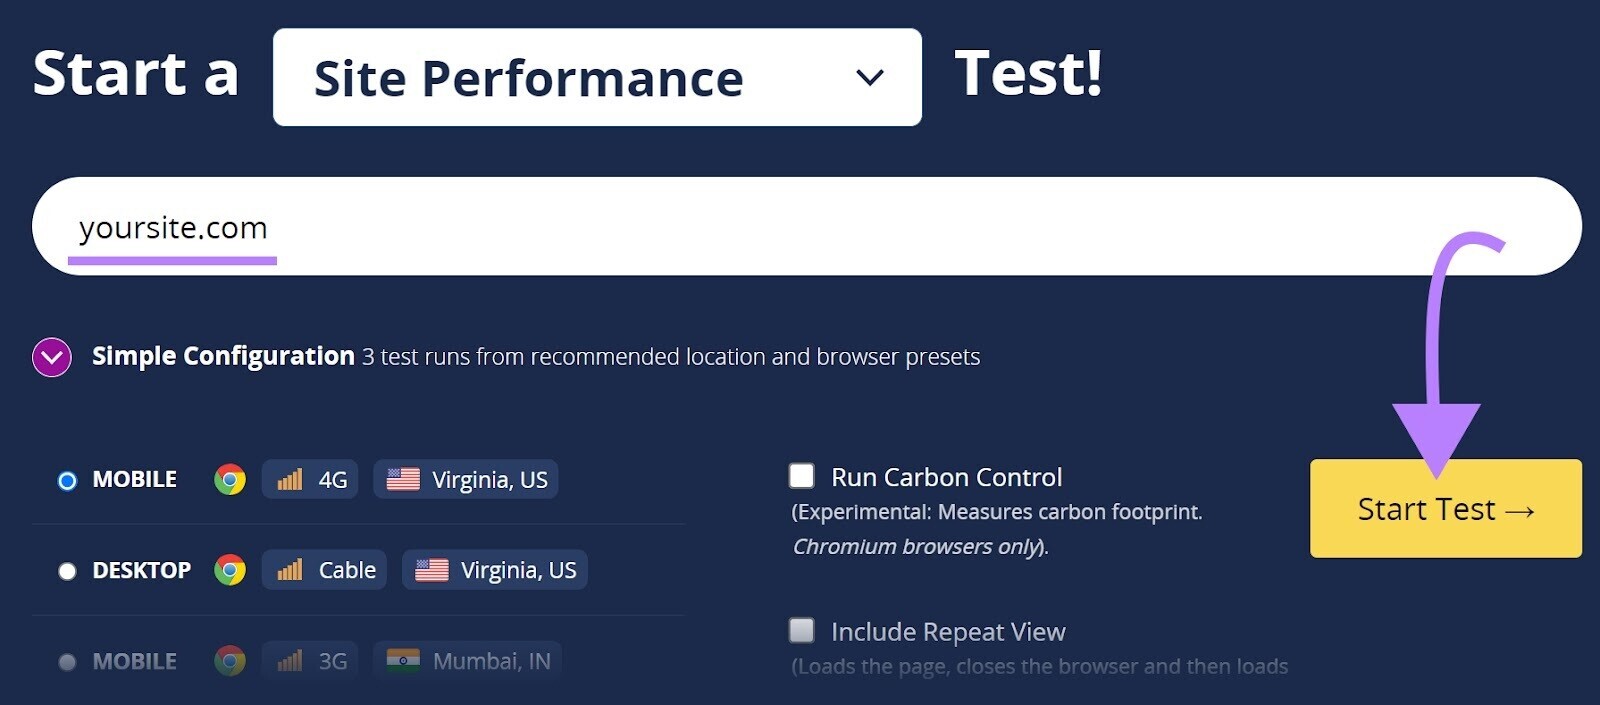 WebPageTest ،mepage with text "S، a Site Performance Test!"